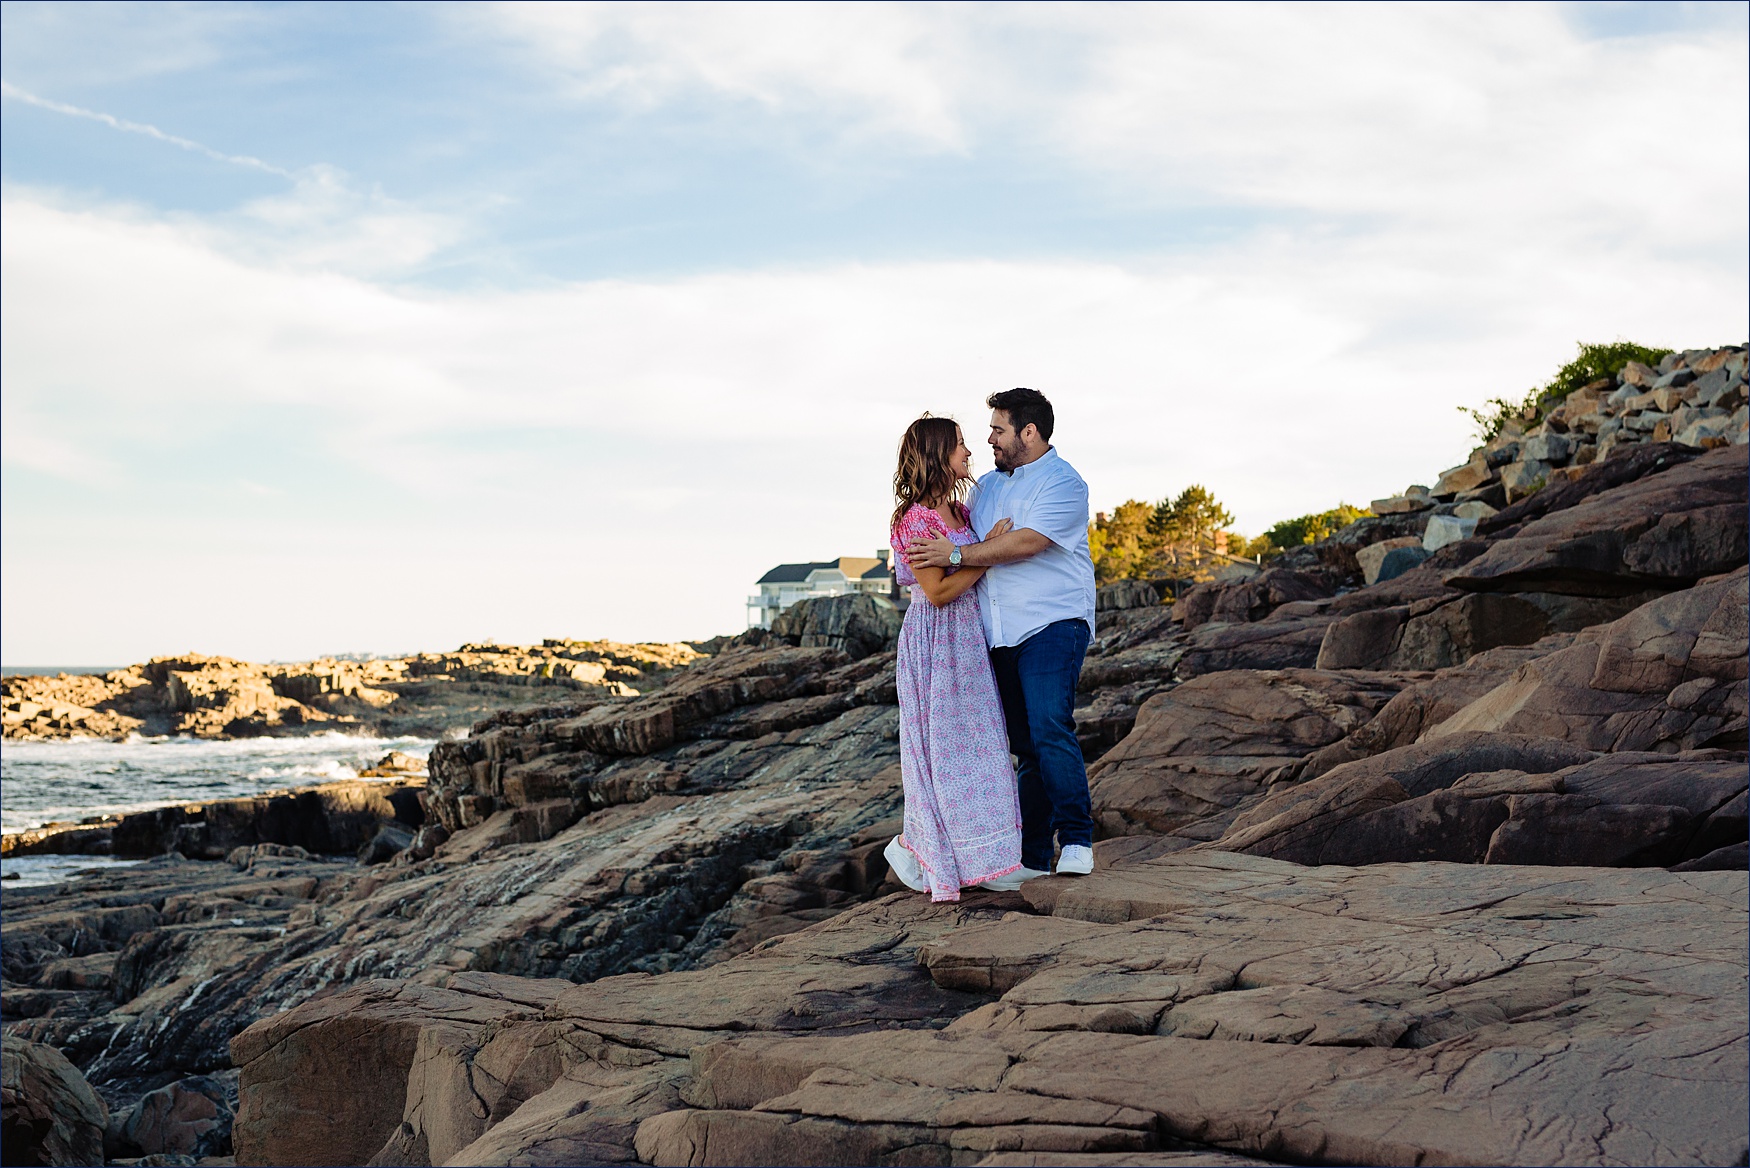 The couple take in the last light of the day out on Bald Head Cliff in Ogunquit Maine